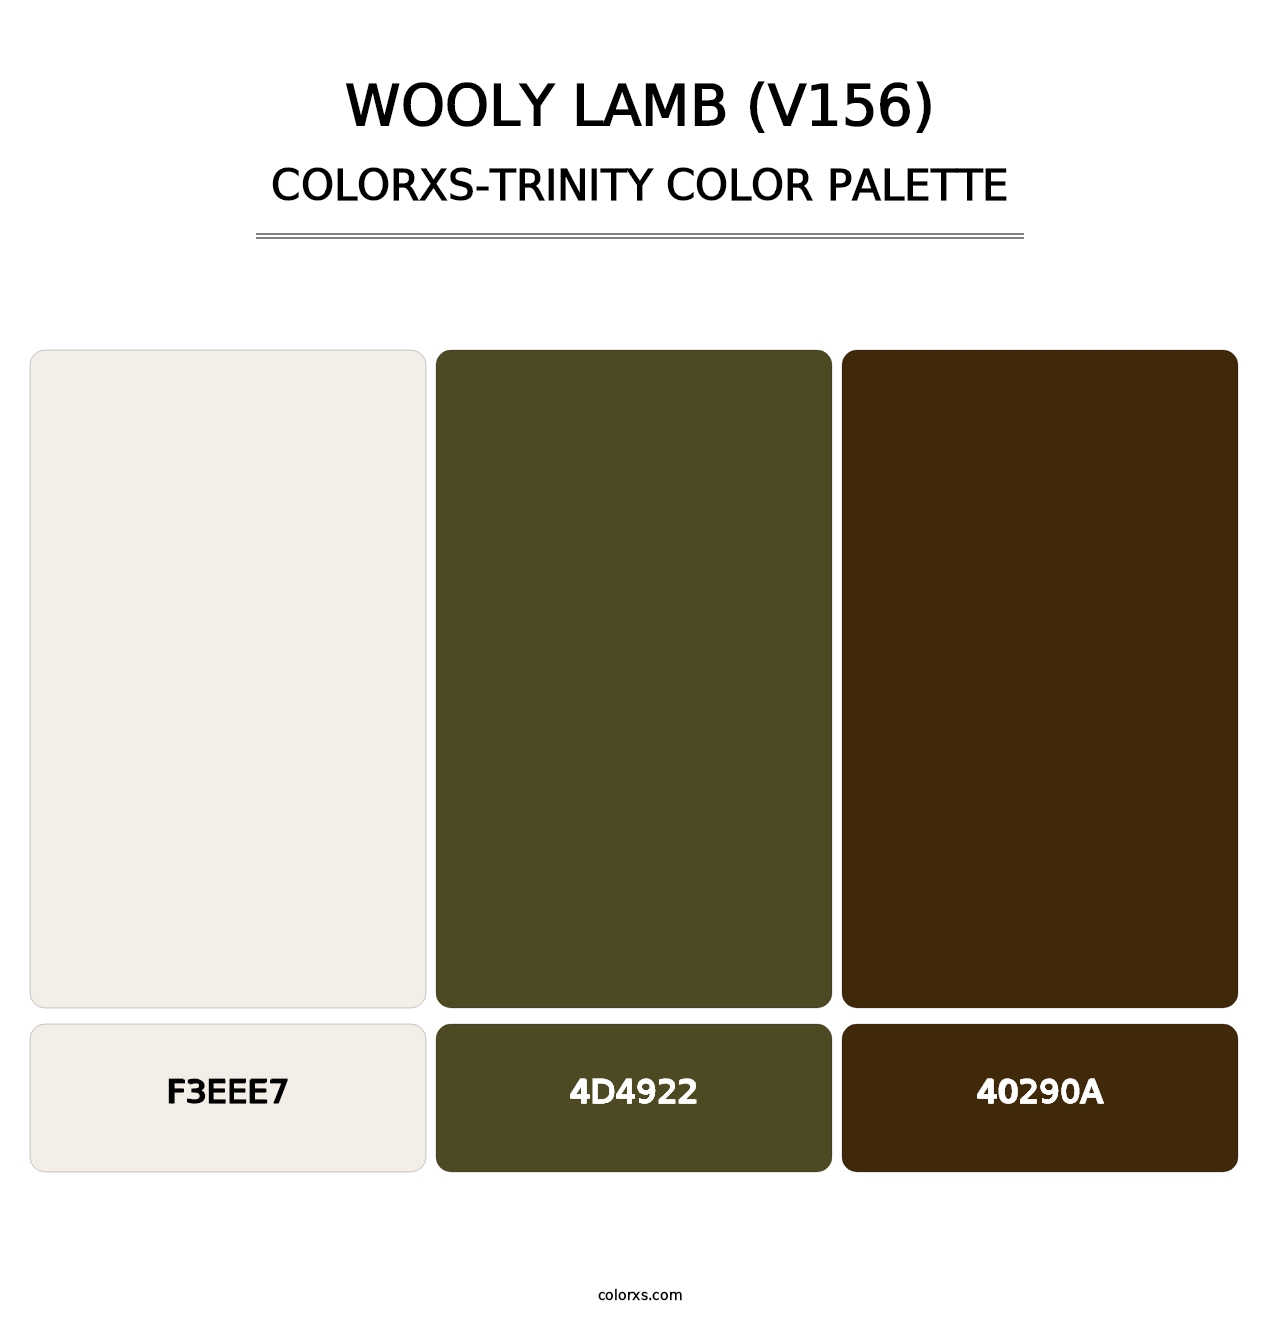 Wooly Lamb (V156) - Colorxs Trinity Palette